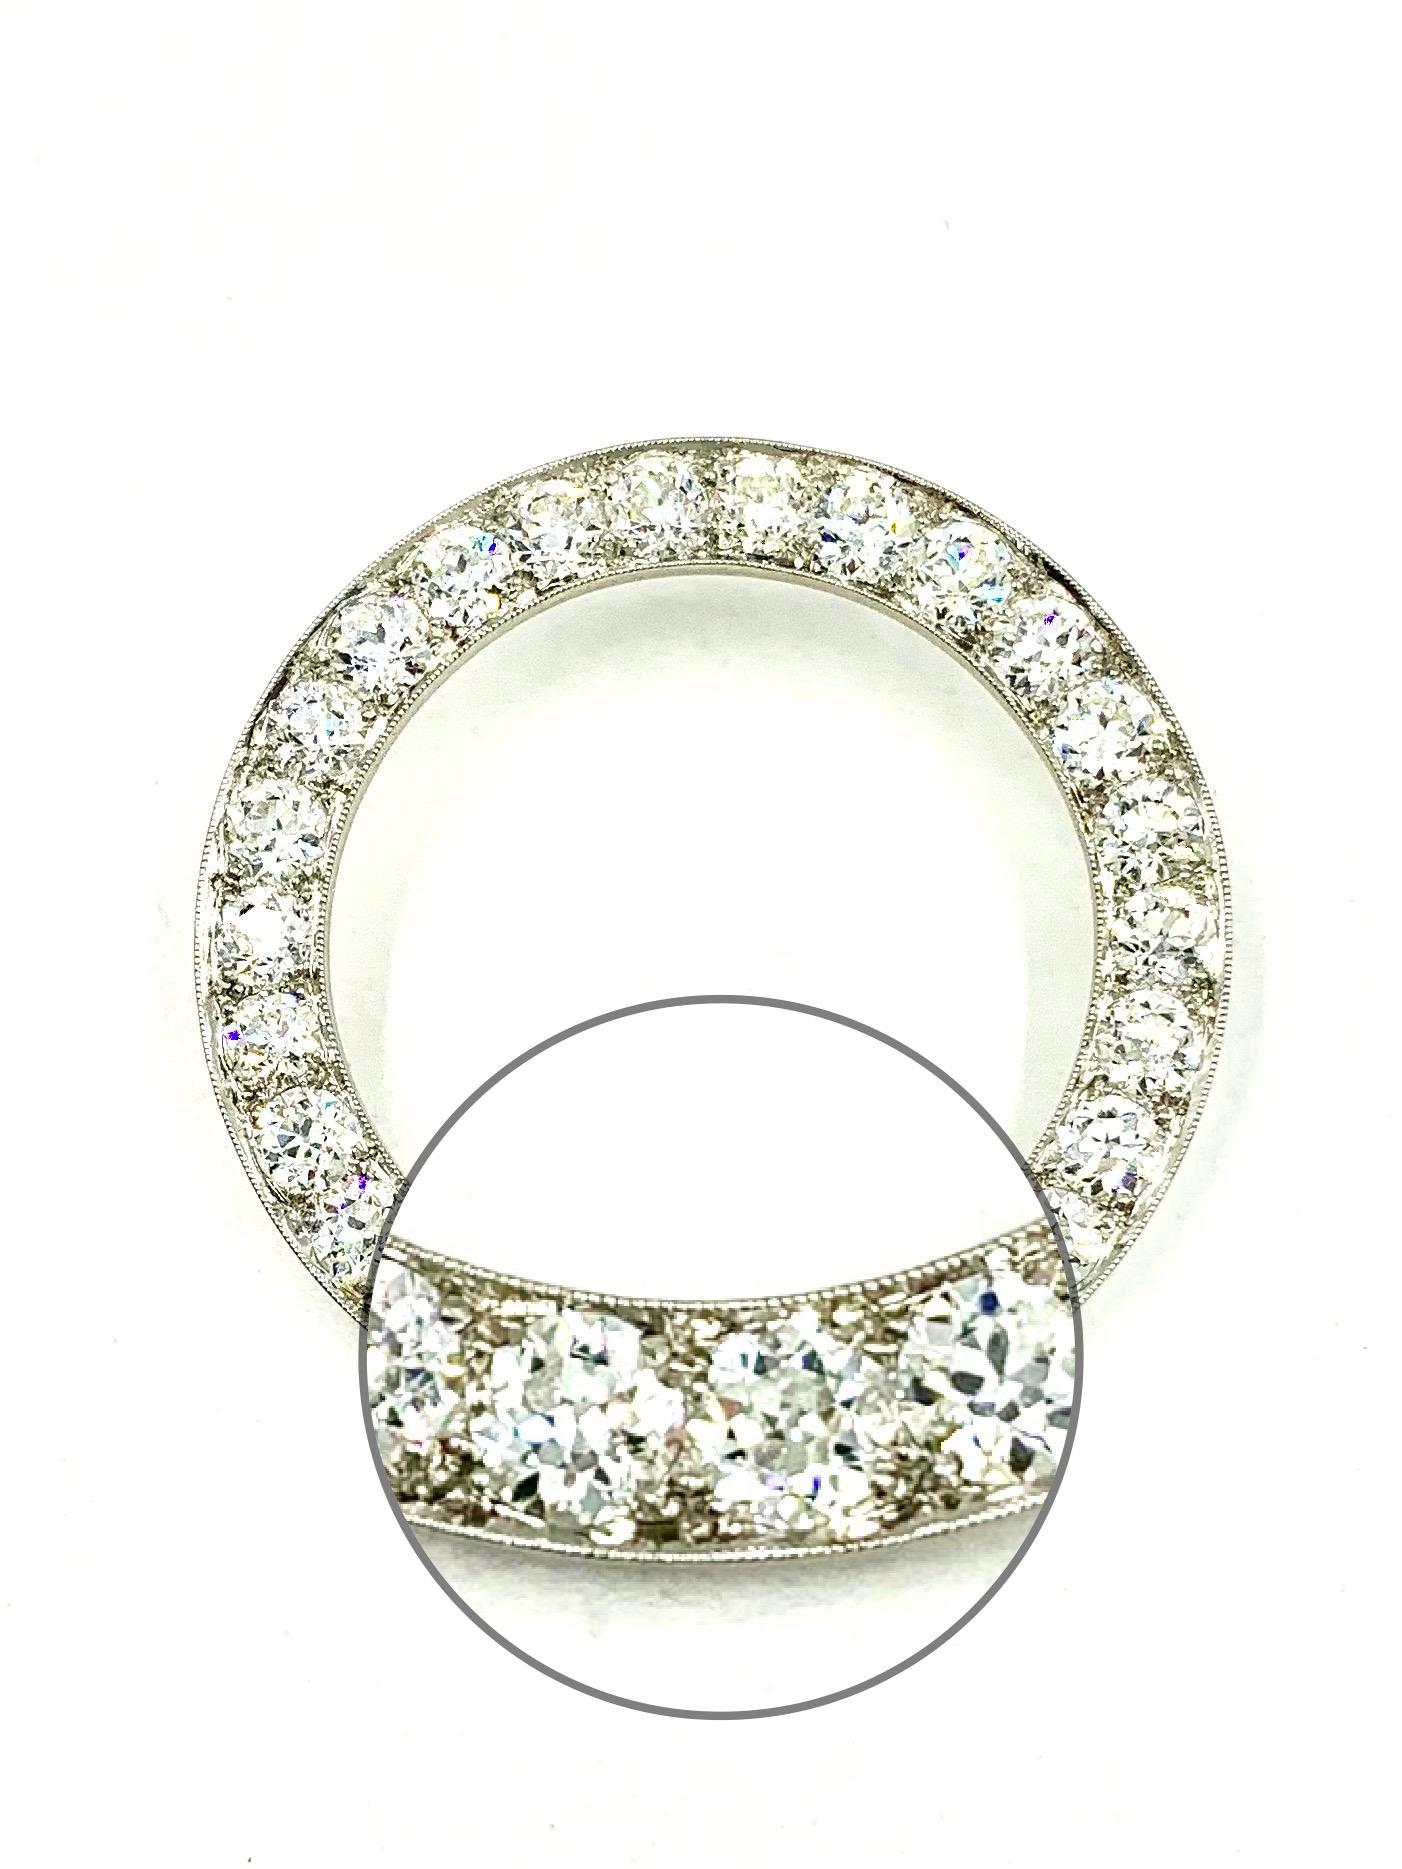 Spectacular Elegant Art Deco 8.45 TCW Diamond Platinum Circle Brooch, Circa 1920 In Good Condition For Sale In New York, NY